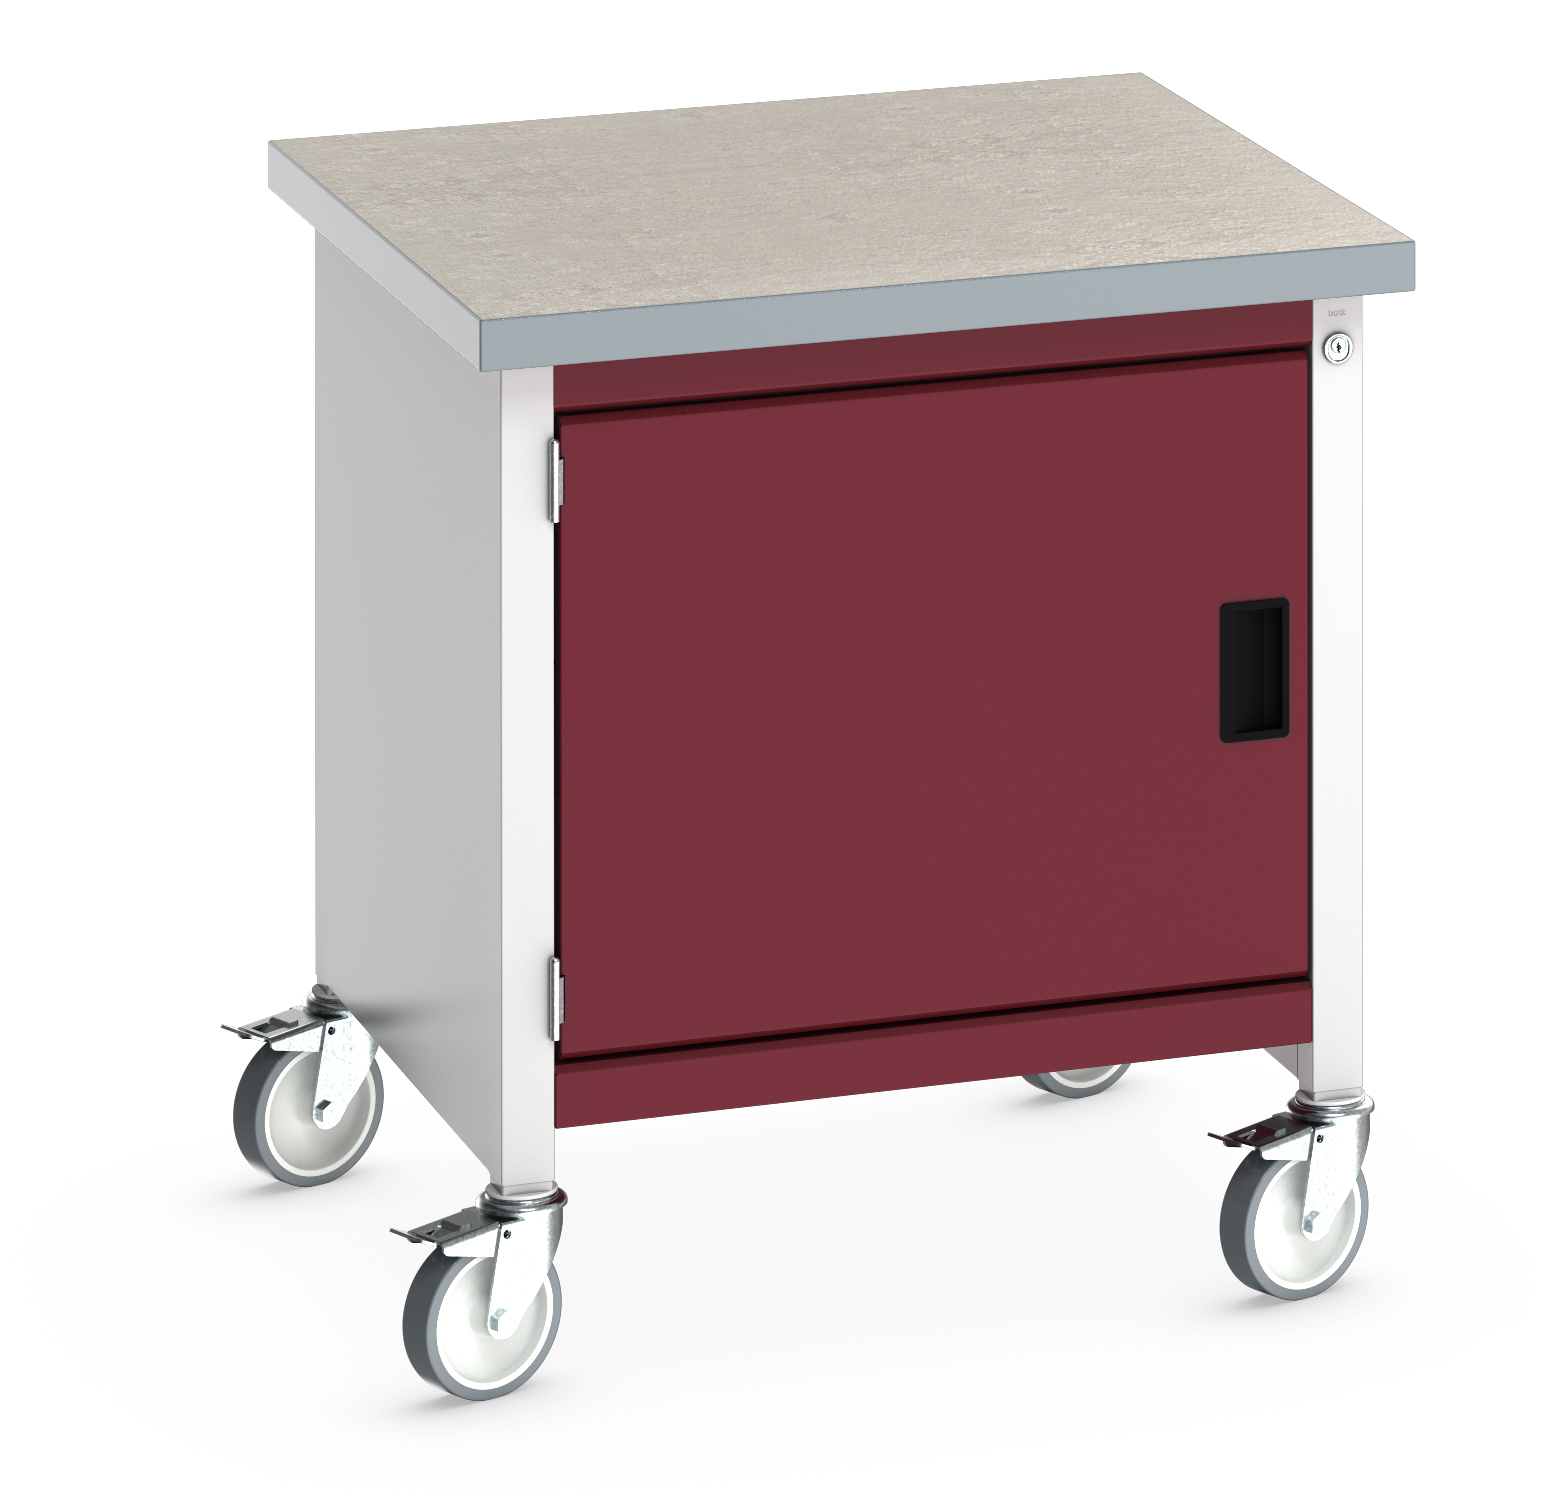 Bott Cubio Mobile Storage Bench With Full Cupboard - 41002087.24V